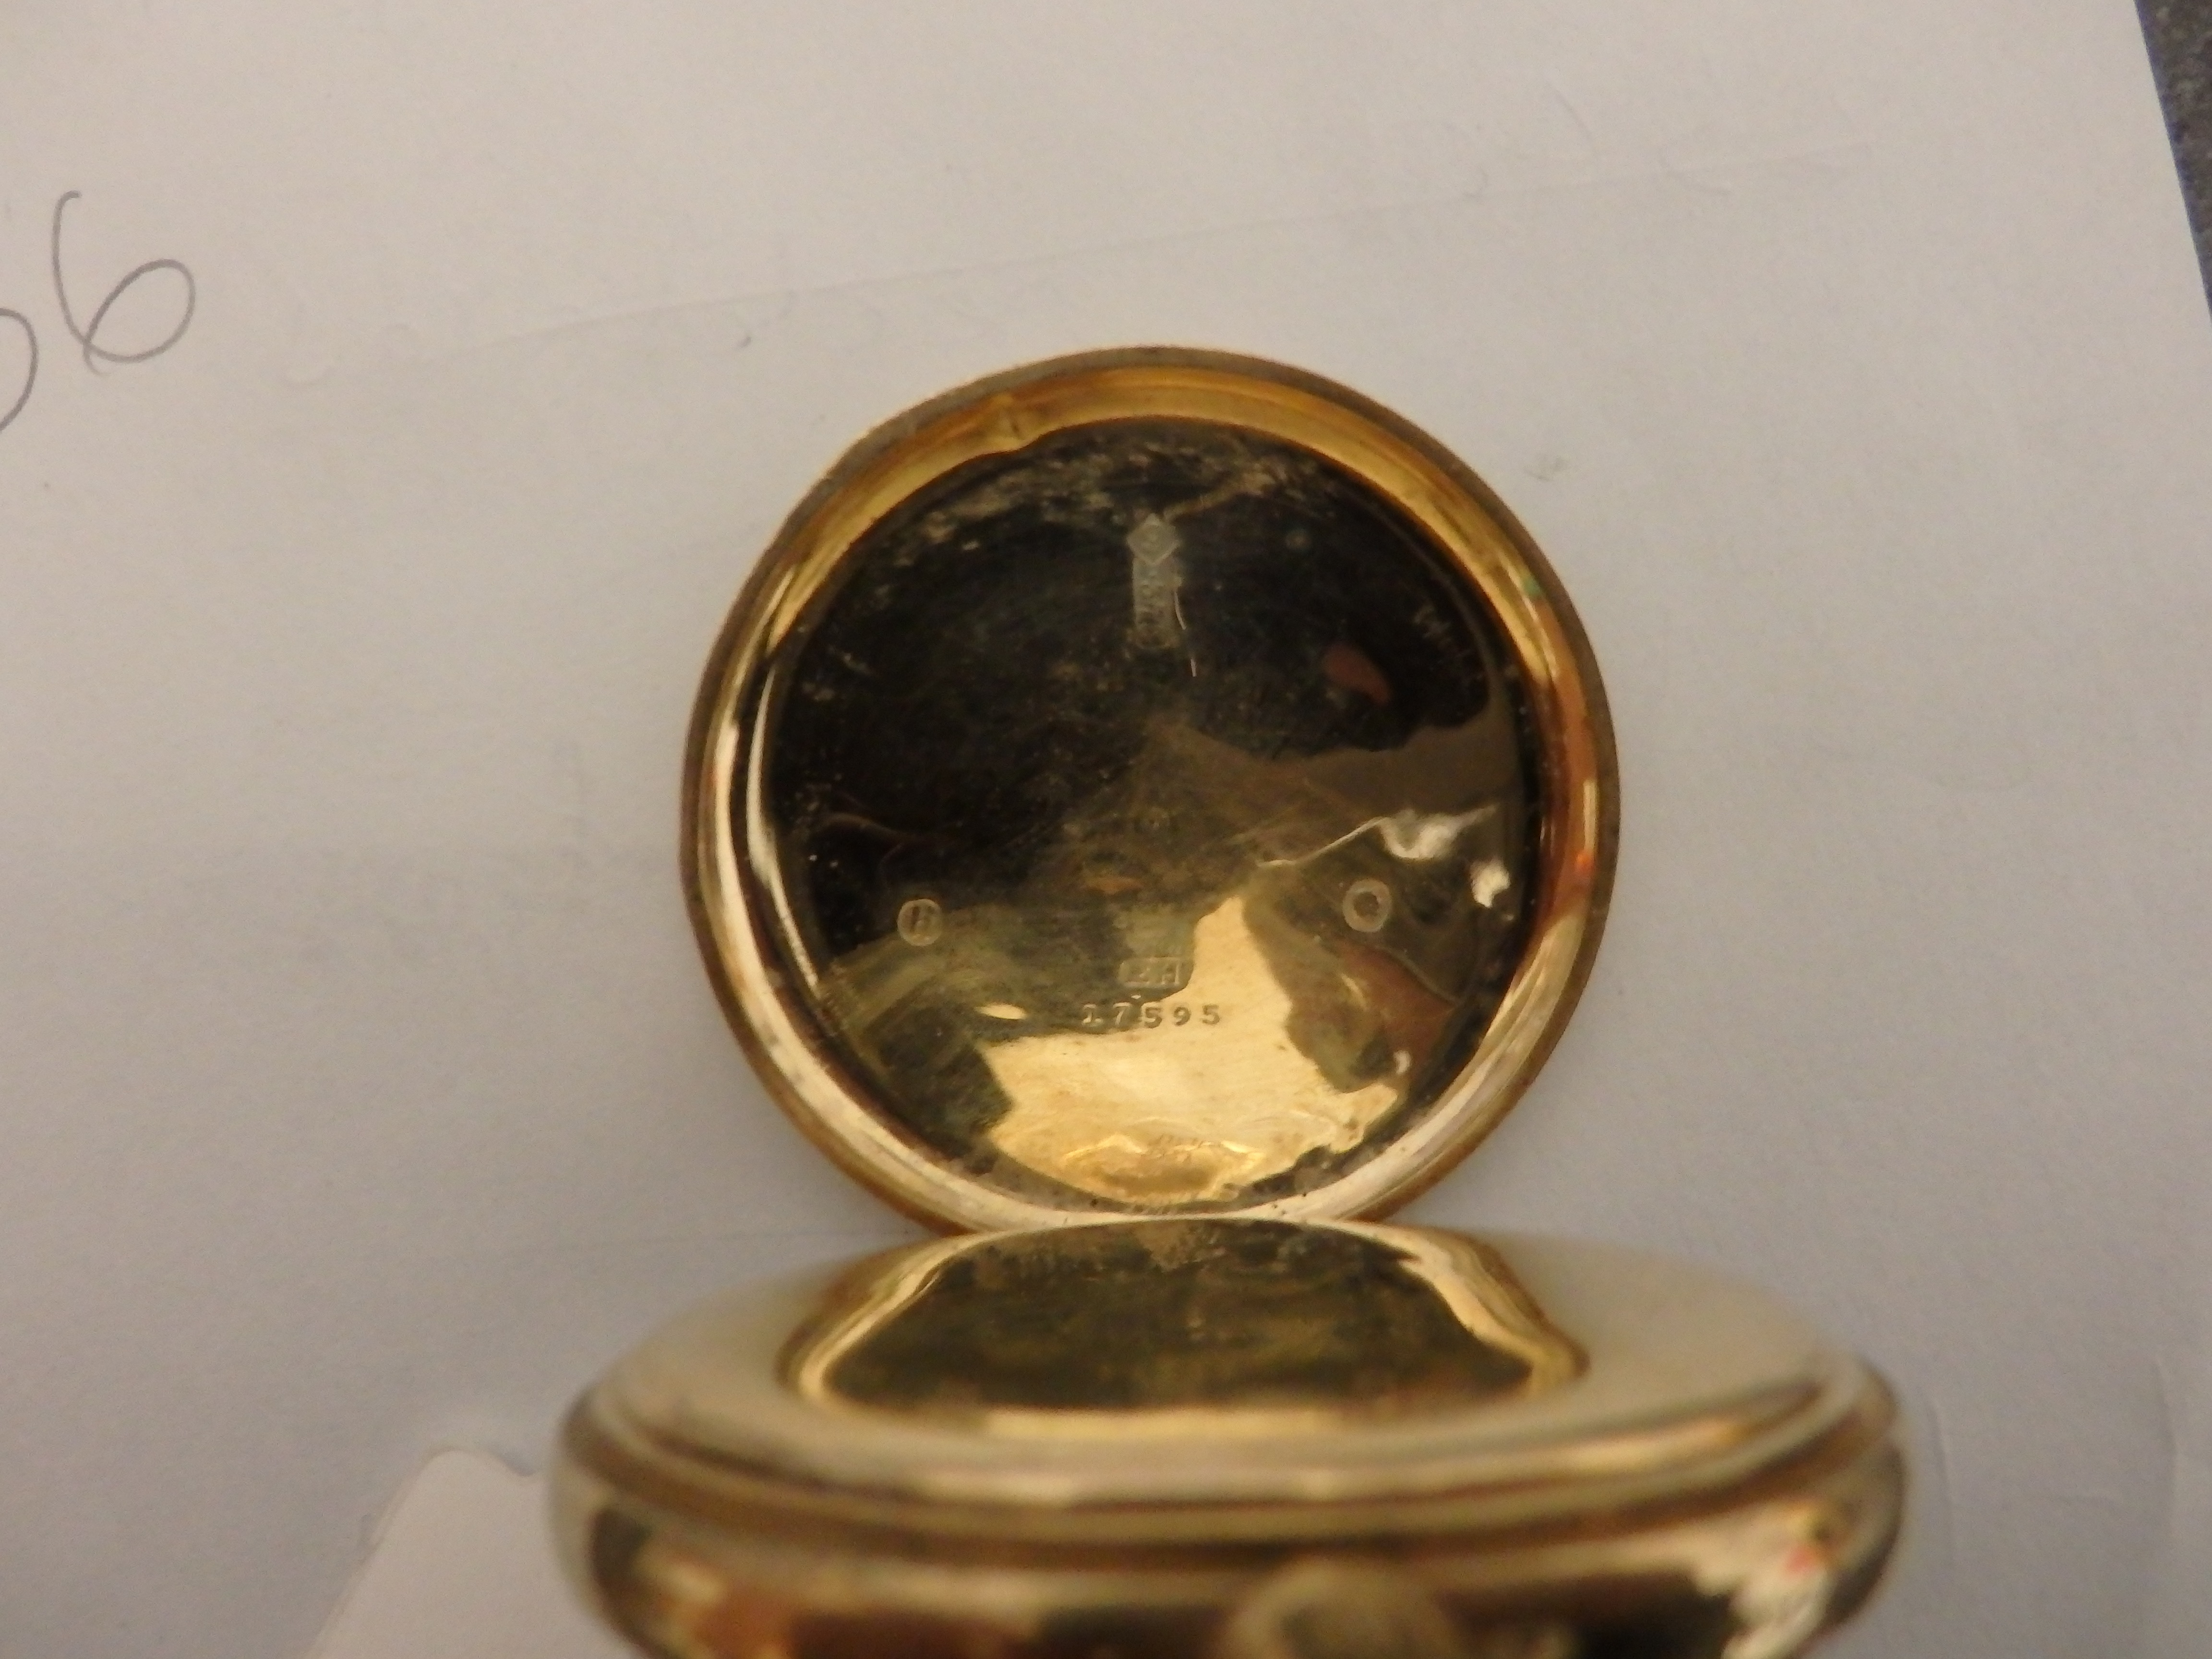 9ct Gold pocket watch made by Waltham - Image 6 of 7